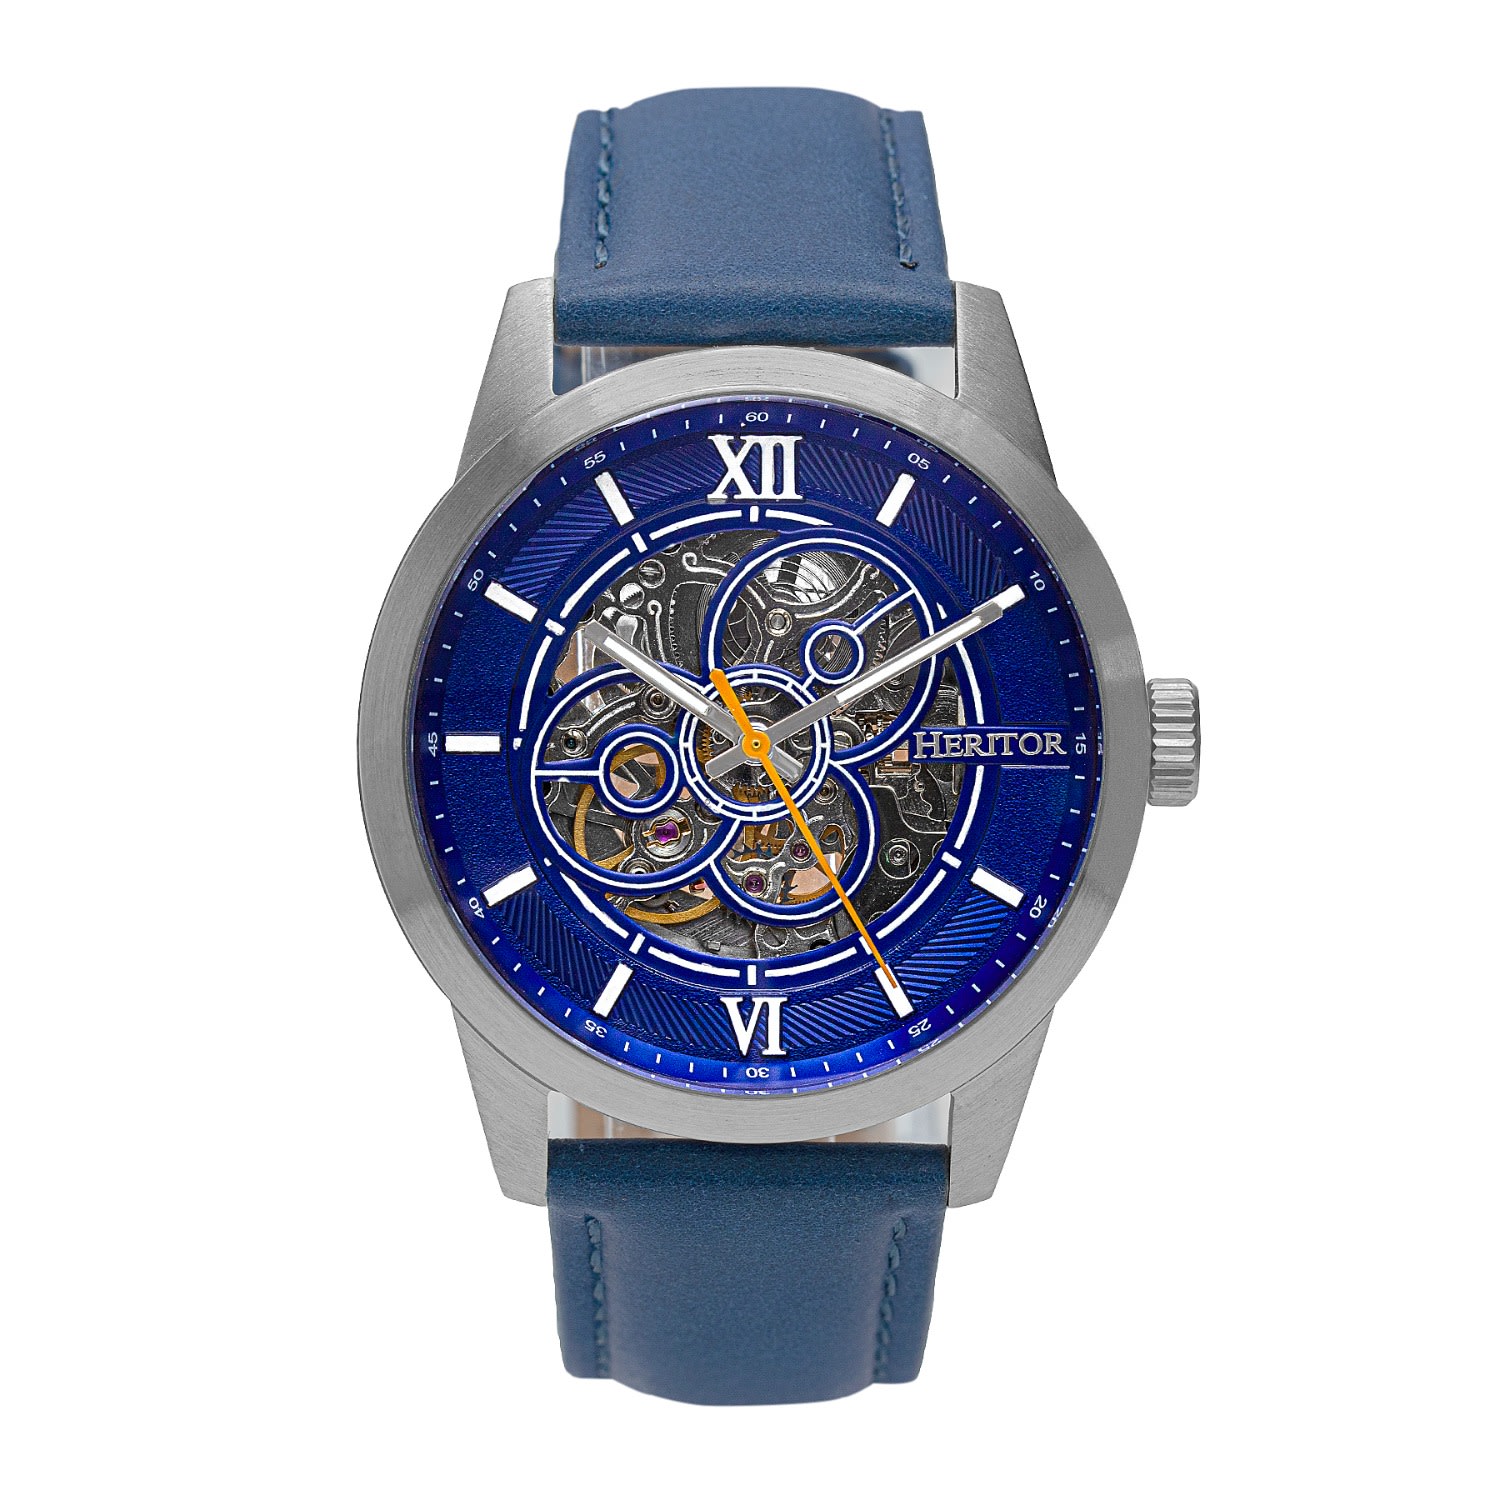 Men’s Silver / Blue Jonas Leather-Band Skeleton Watch - Blue, Silver Heritor Automatic